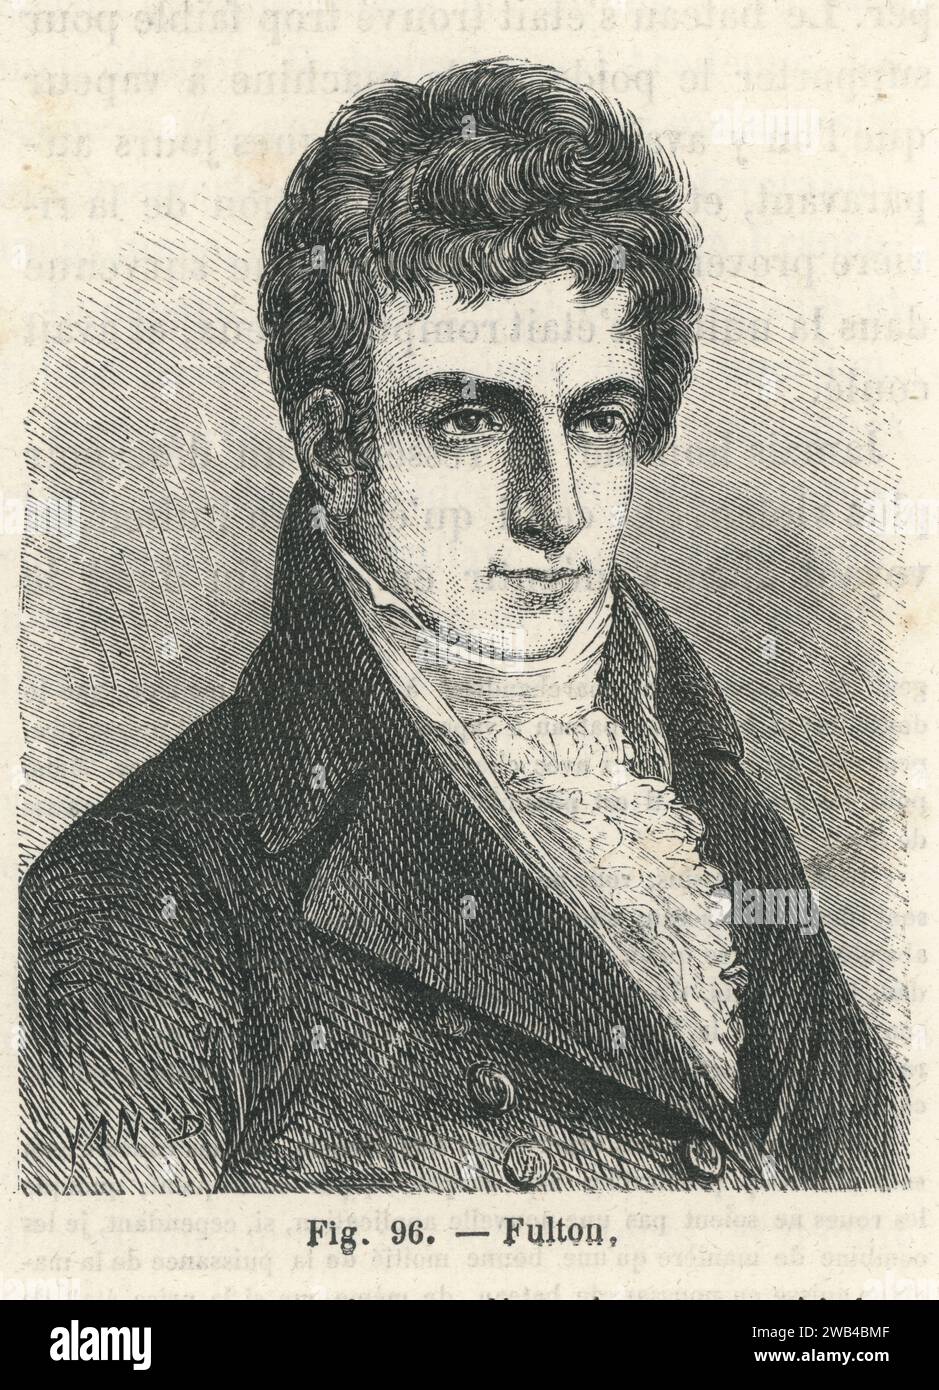 Portrait of Robert Fulton, American engineer. He invented the steamboat in 1803.  Illustration from 'Les Merveilles de la science ou description populaire des inventions modernes' written by Louis Figuier and published in 1867 by Furne, Jouvet et Cie. Stock Photo